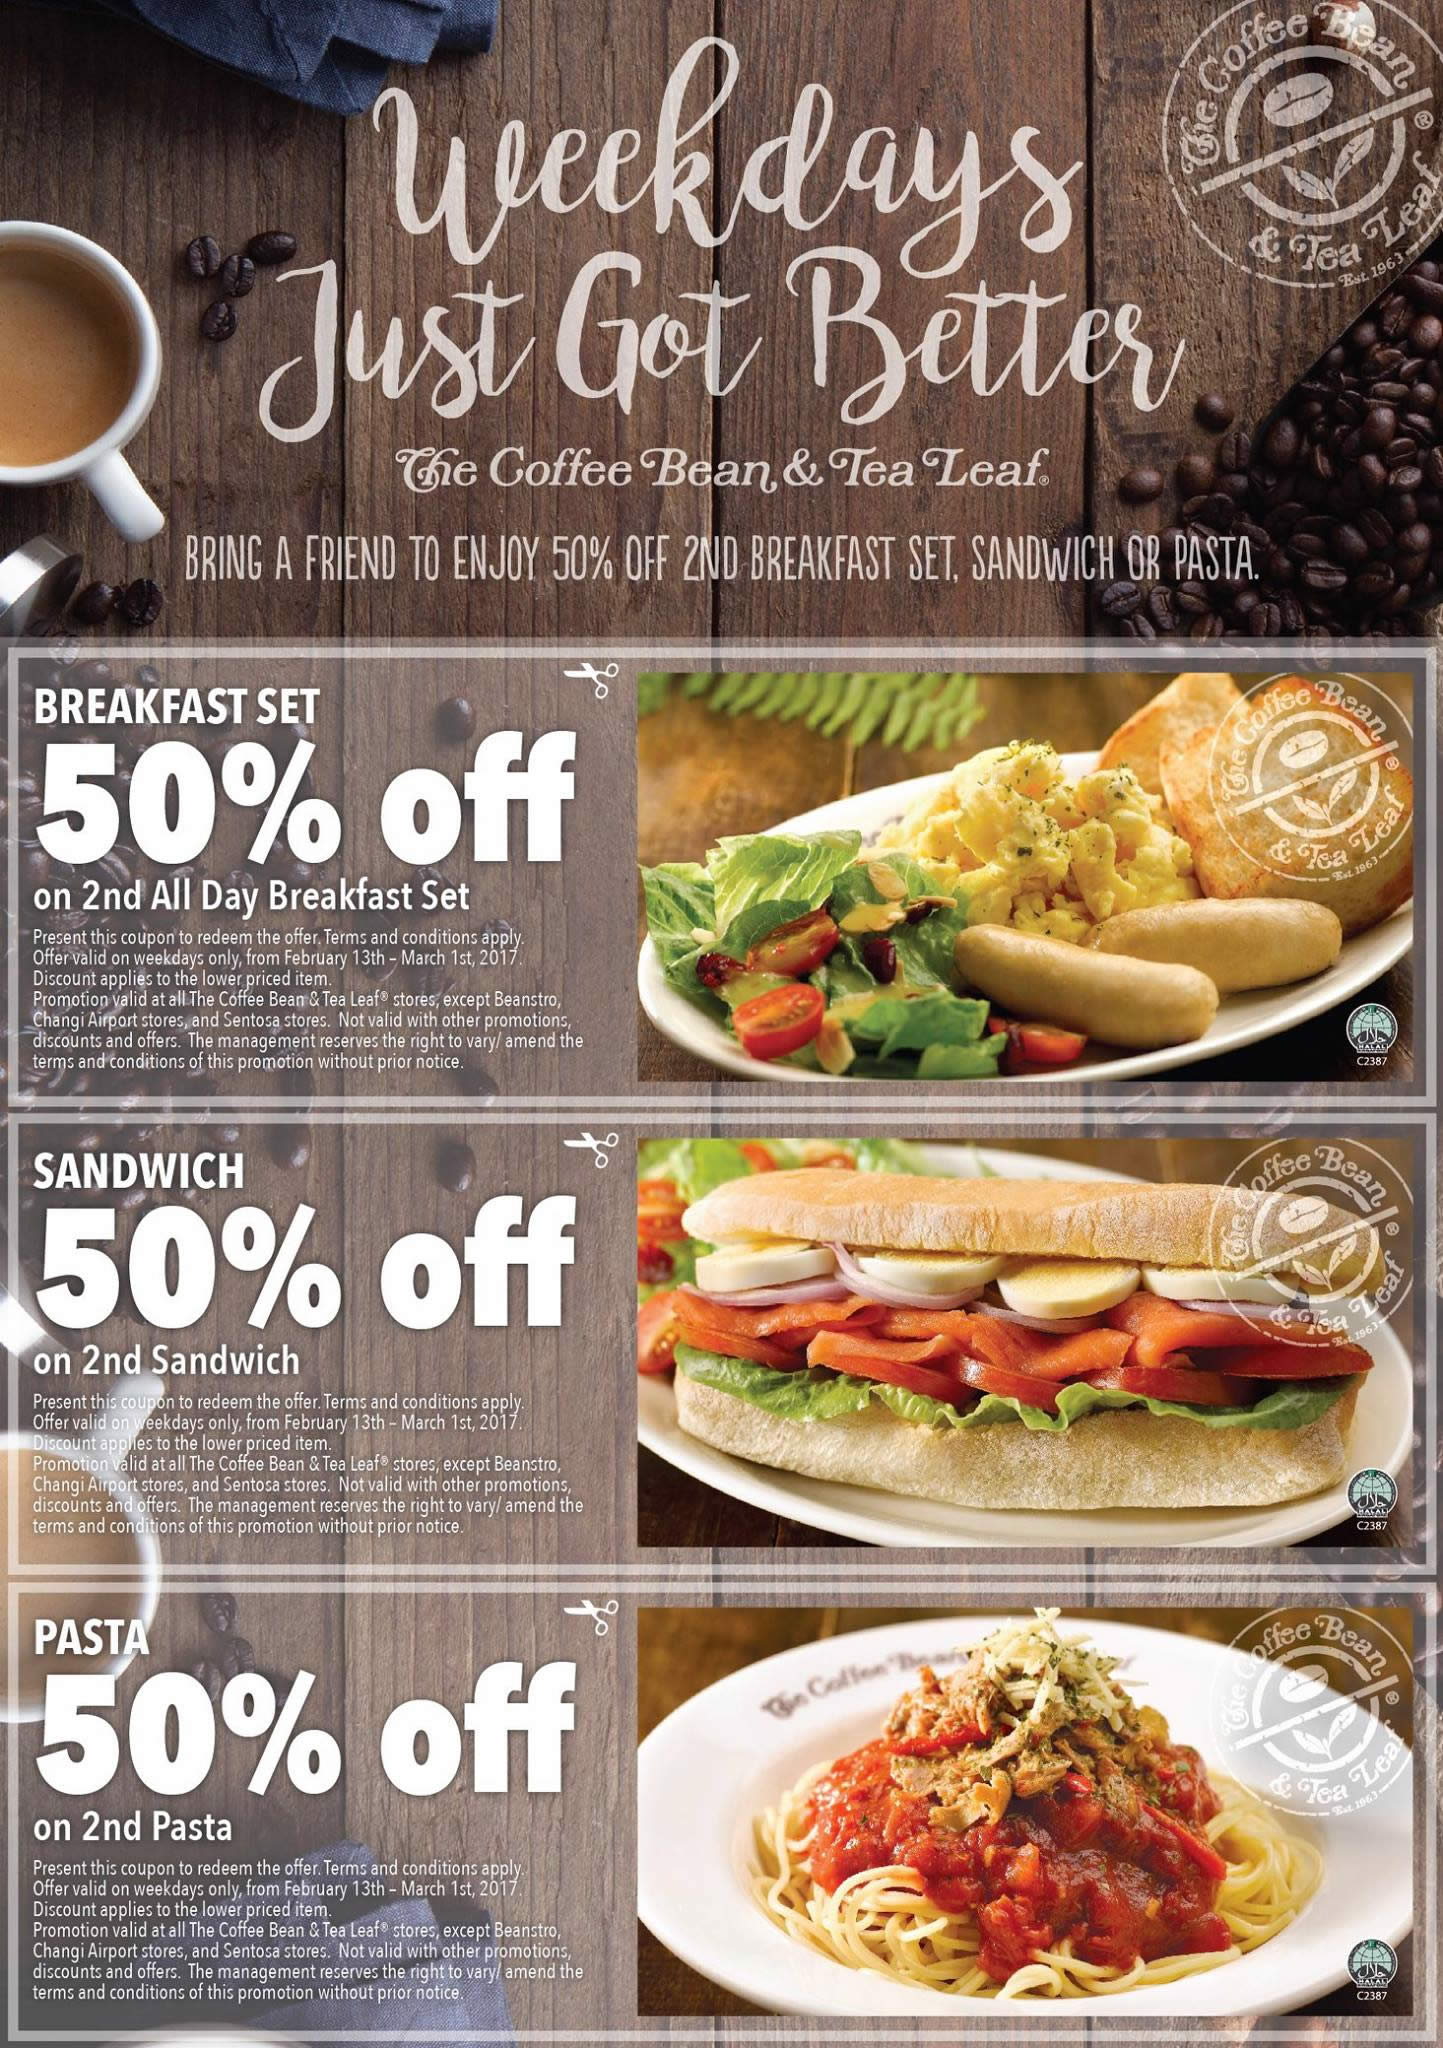 Coffee Bean & Tea Leaf coupon deals Save 50 off the second breakfast